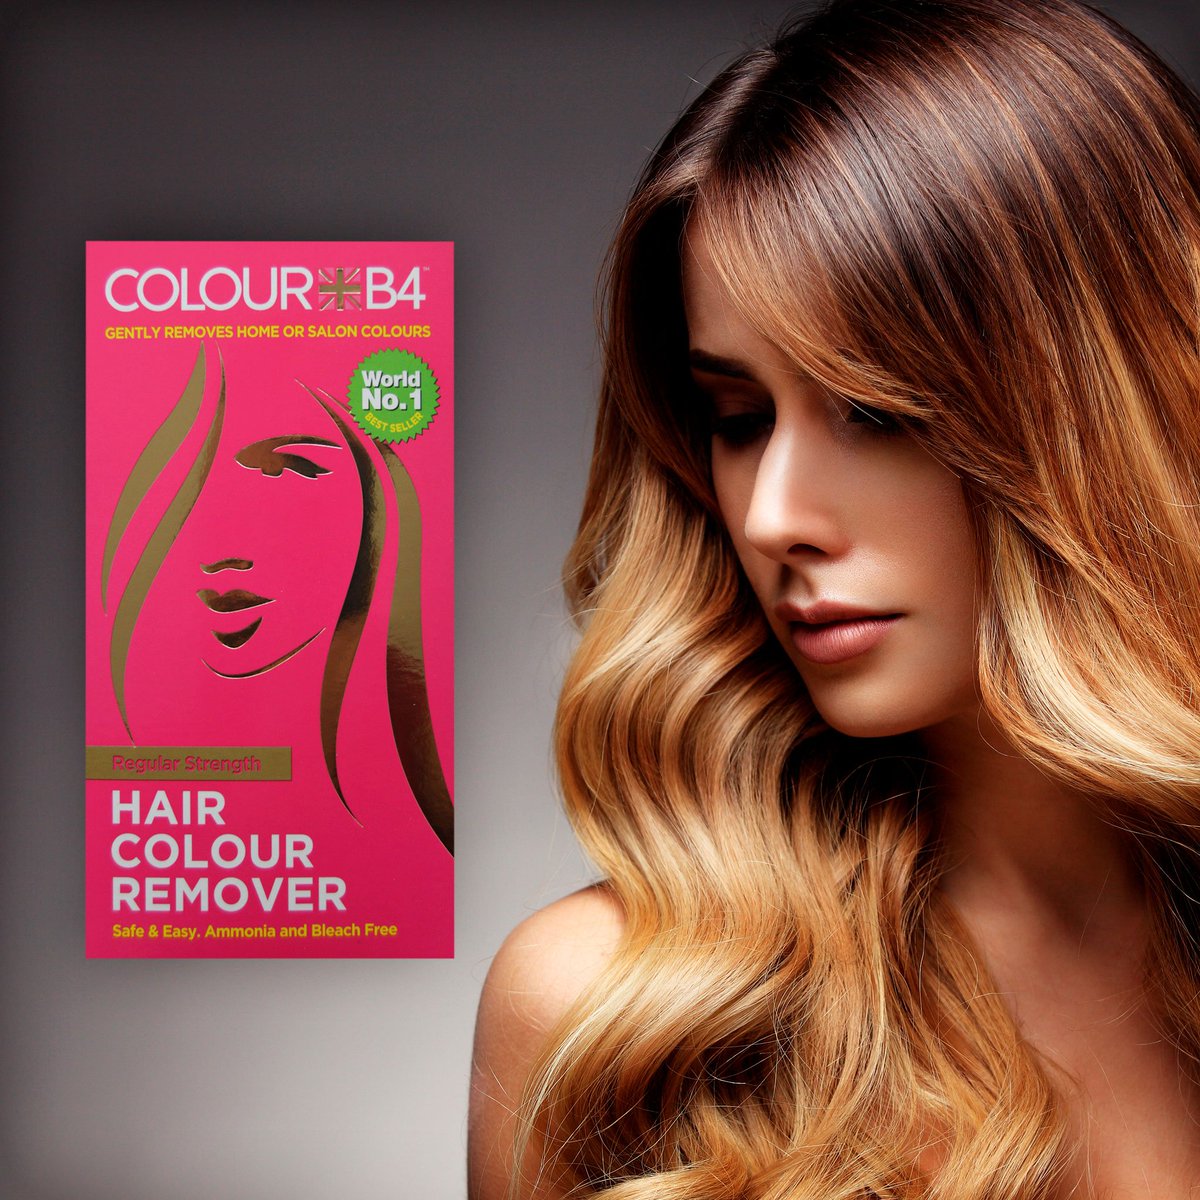 Colourb4 On Twitter Remove Your Hair Colour The Safe Way